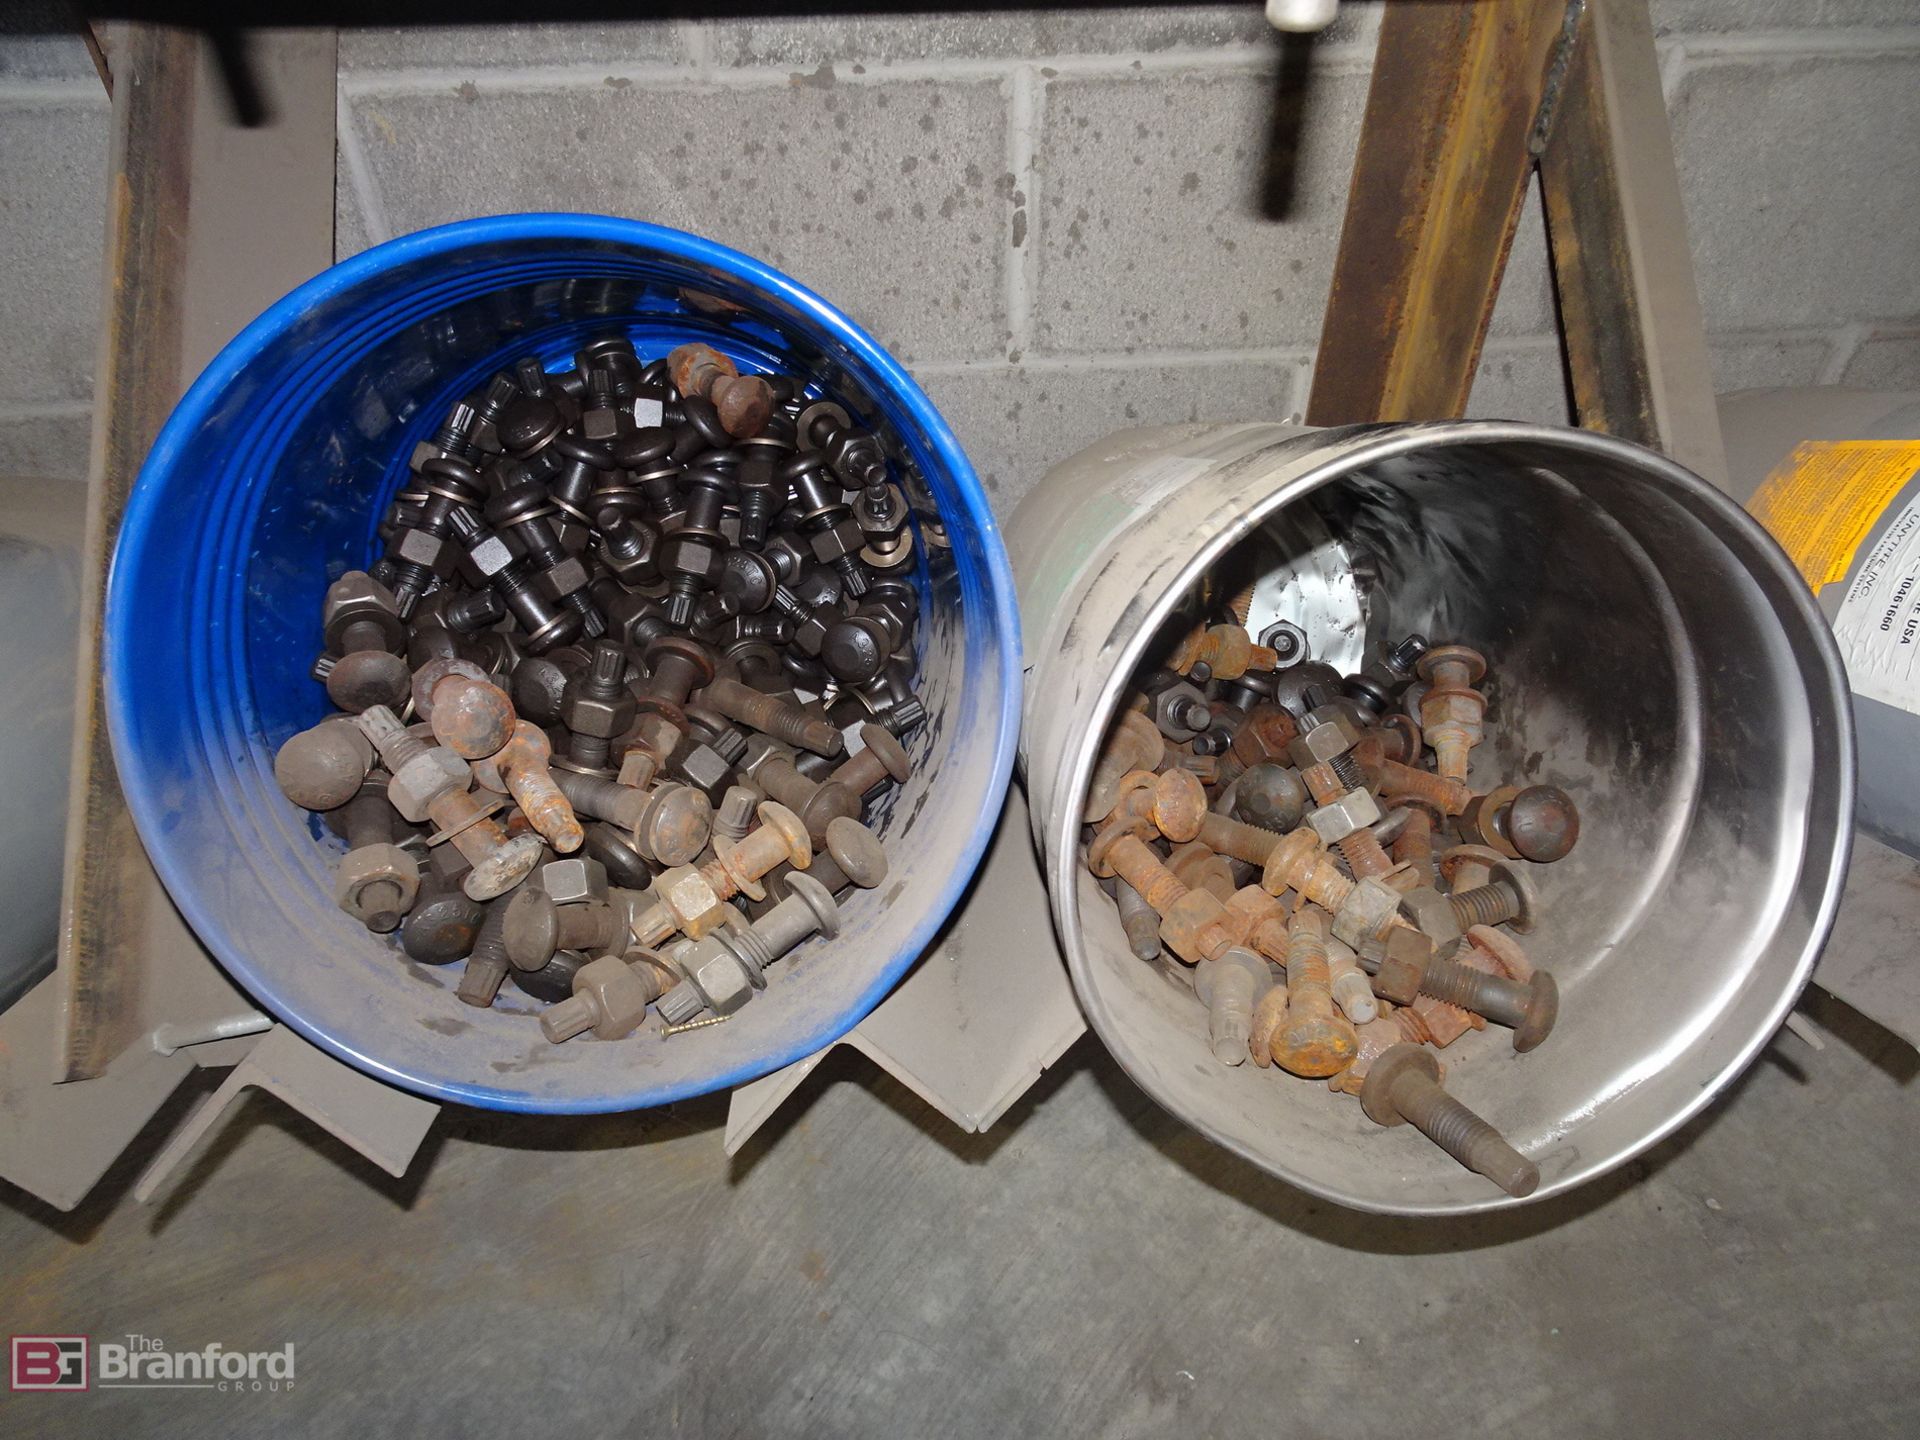 (2) Buckets of Structural Nuts, Bolts and Washers